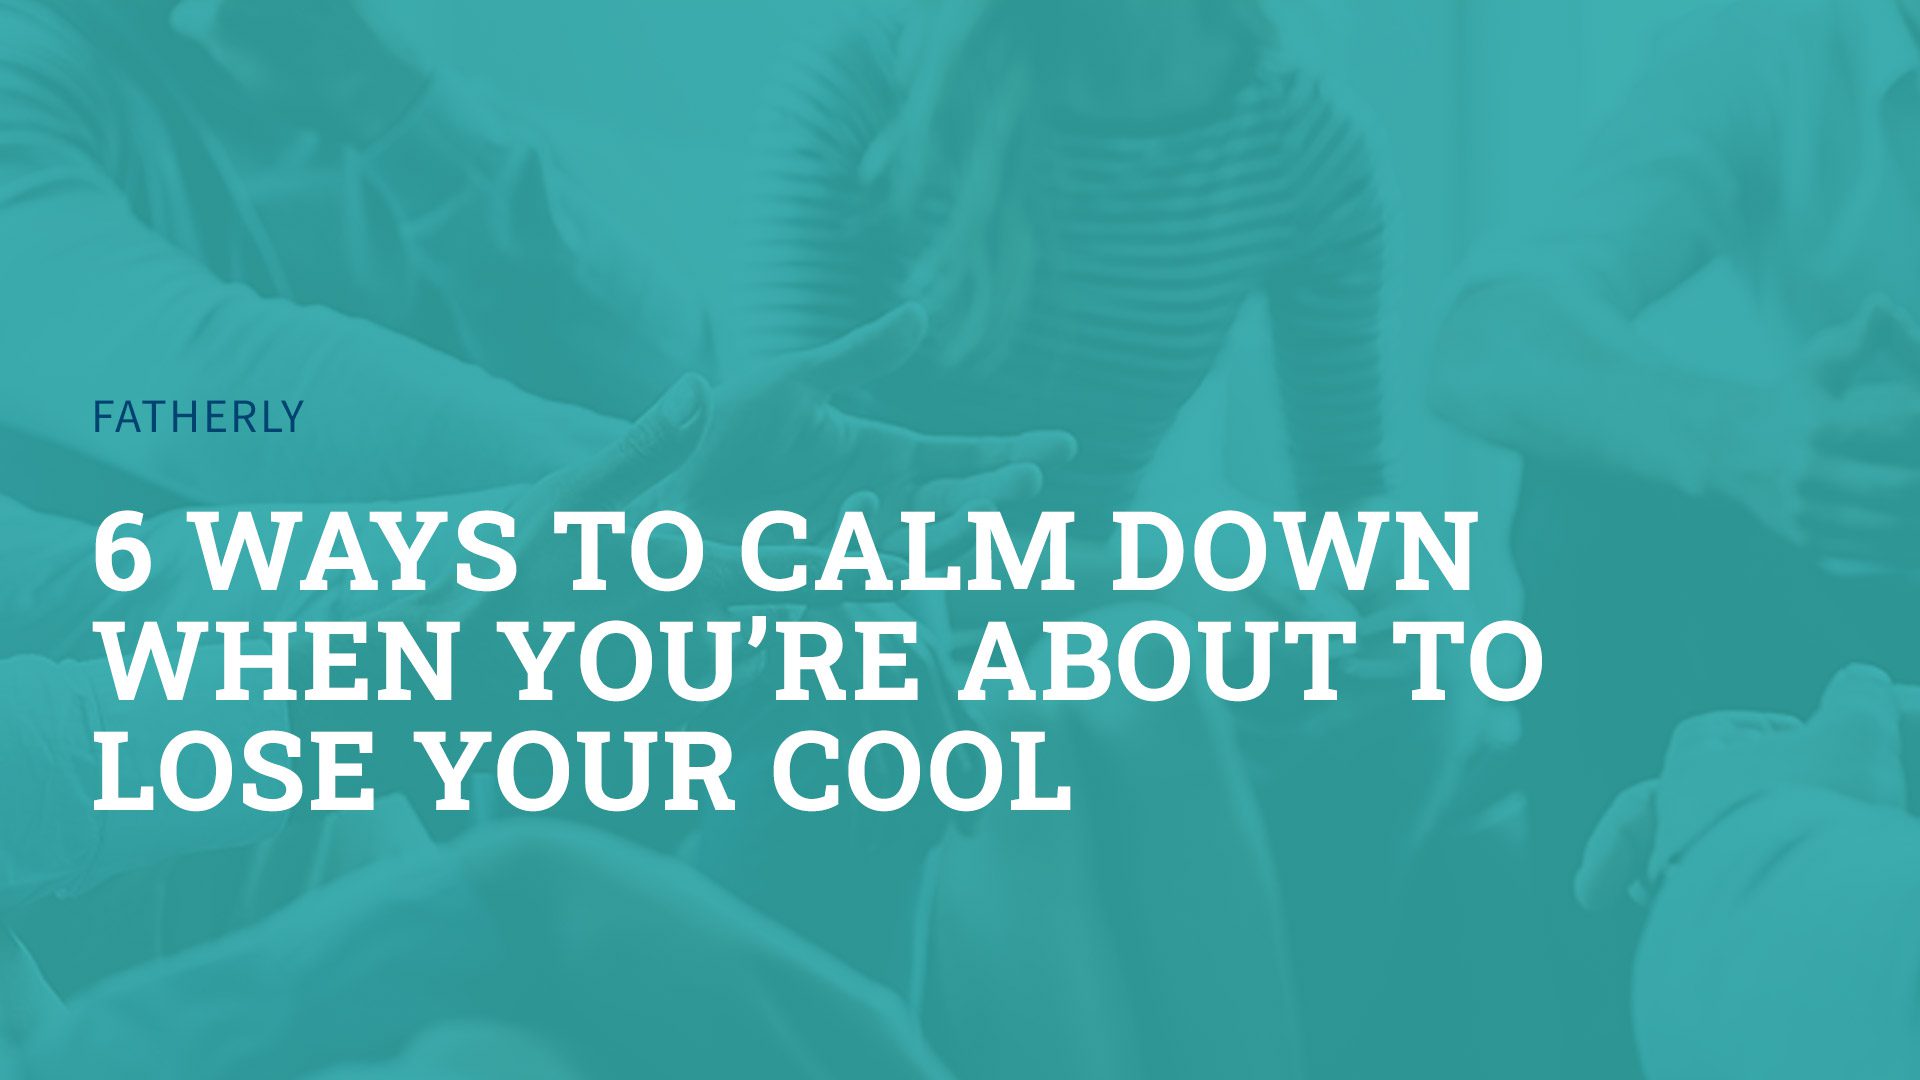 6 Ways to Calm Down When You’re About to Lose Your Cool